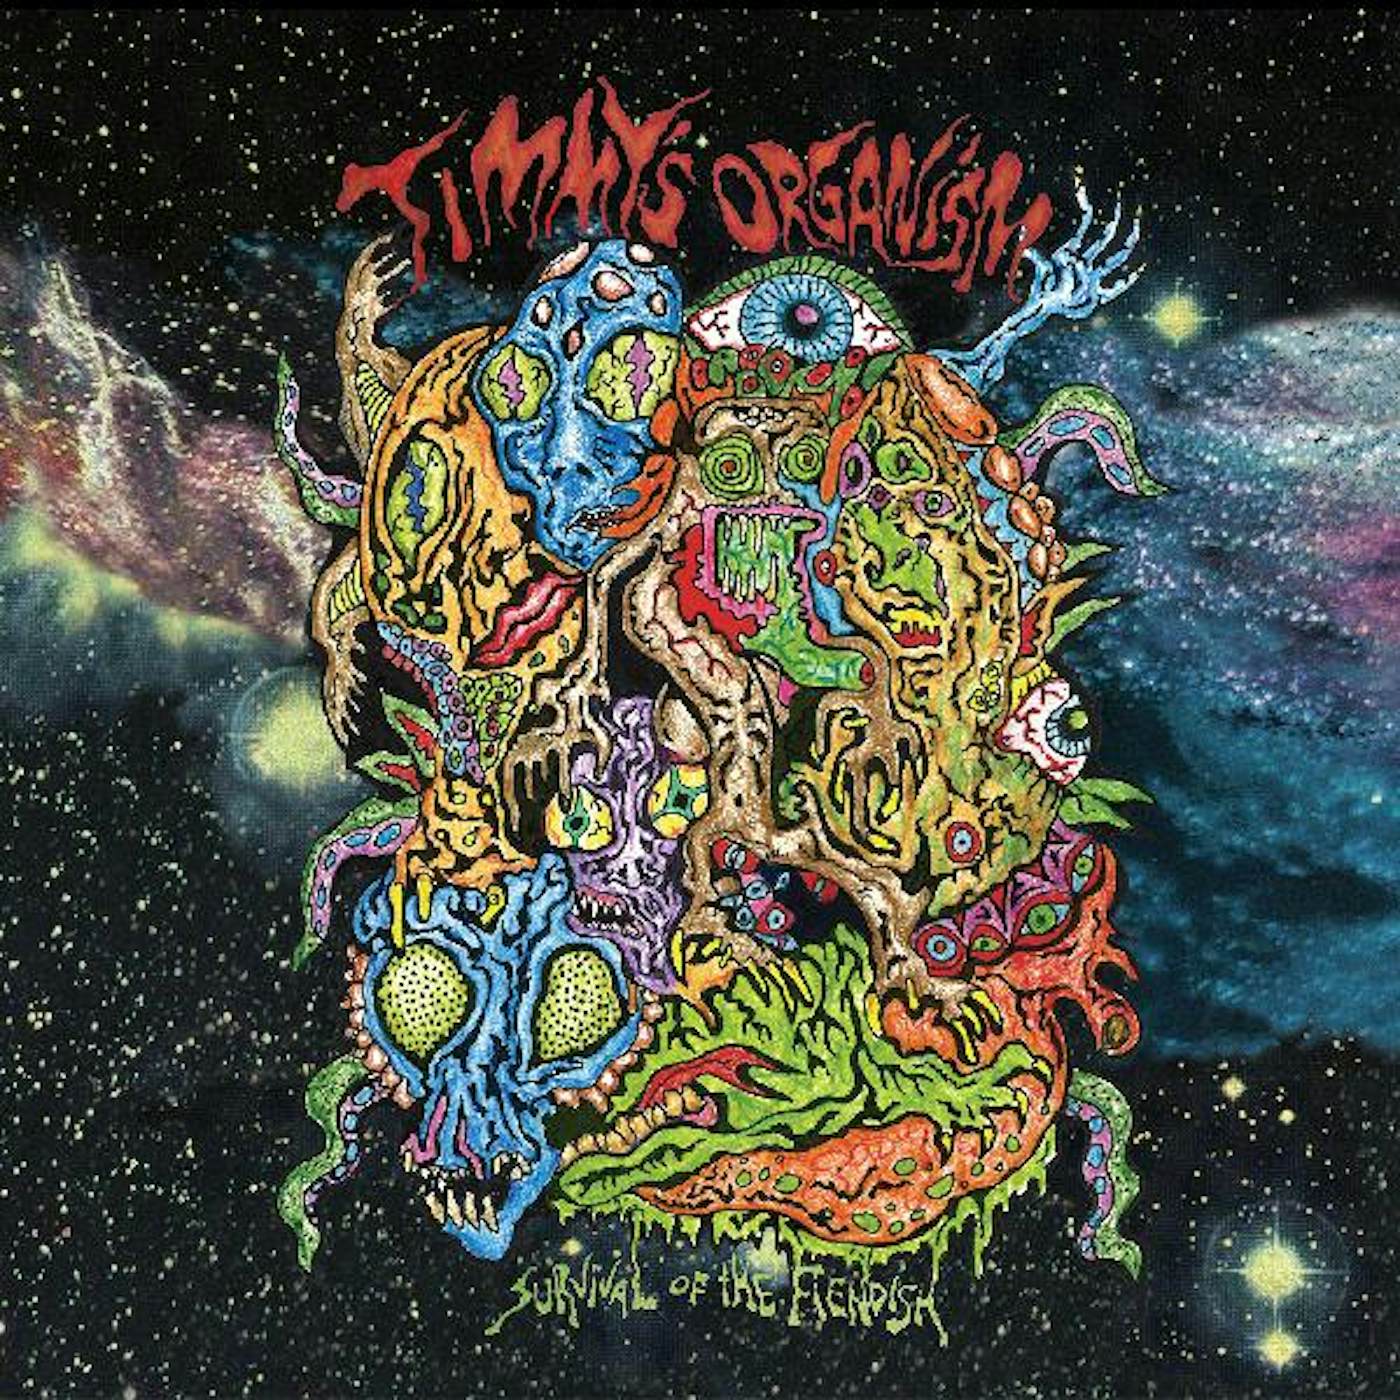 Timmy's Organism SURVIVAL OF THE FIENDISH Vinyl Record